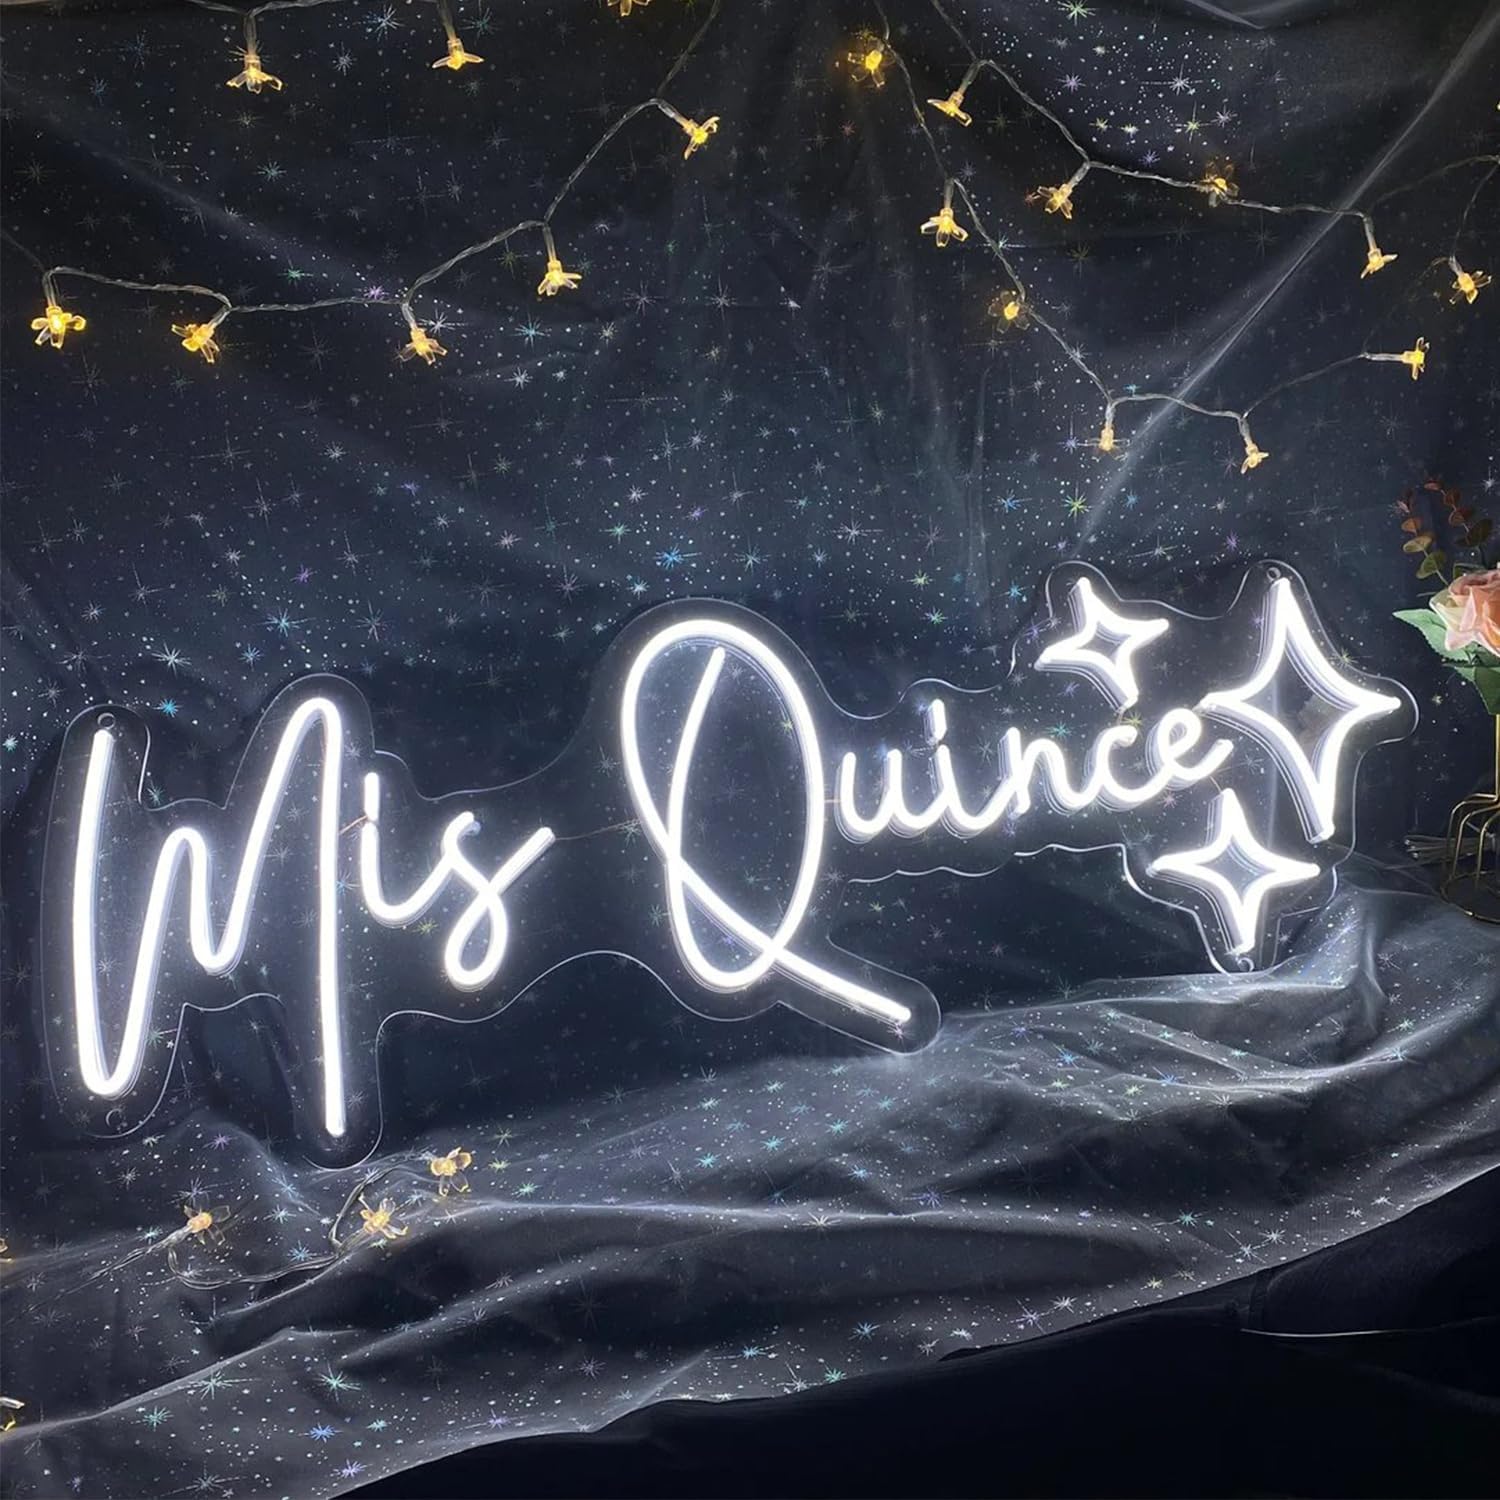 Mis Quince Custom Neon Sign Light for Wall Decor,Quinceanera Neon Light Birthday Gift,Wall Art Neon Led Light Up Signs Personalized Mis Sign Gifts for Her,Size:50cm